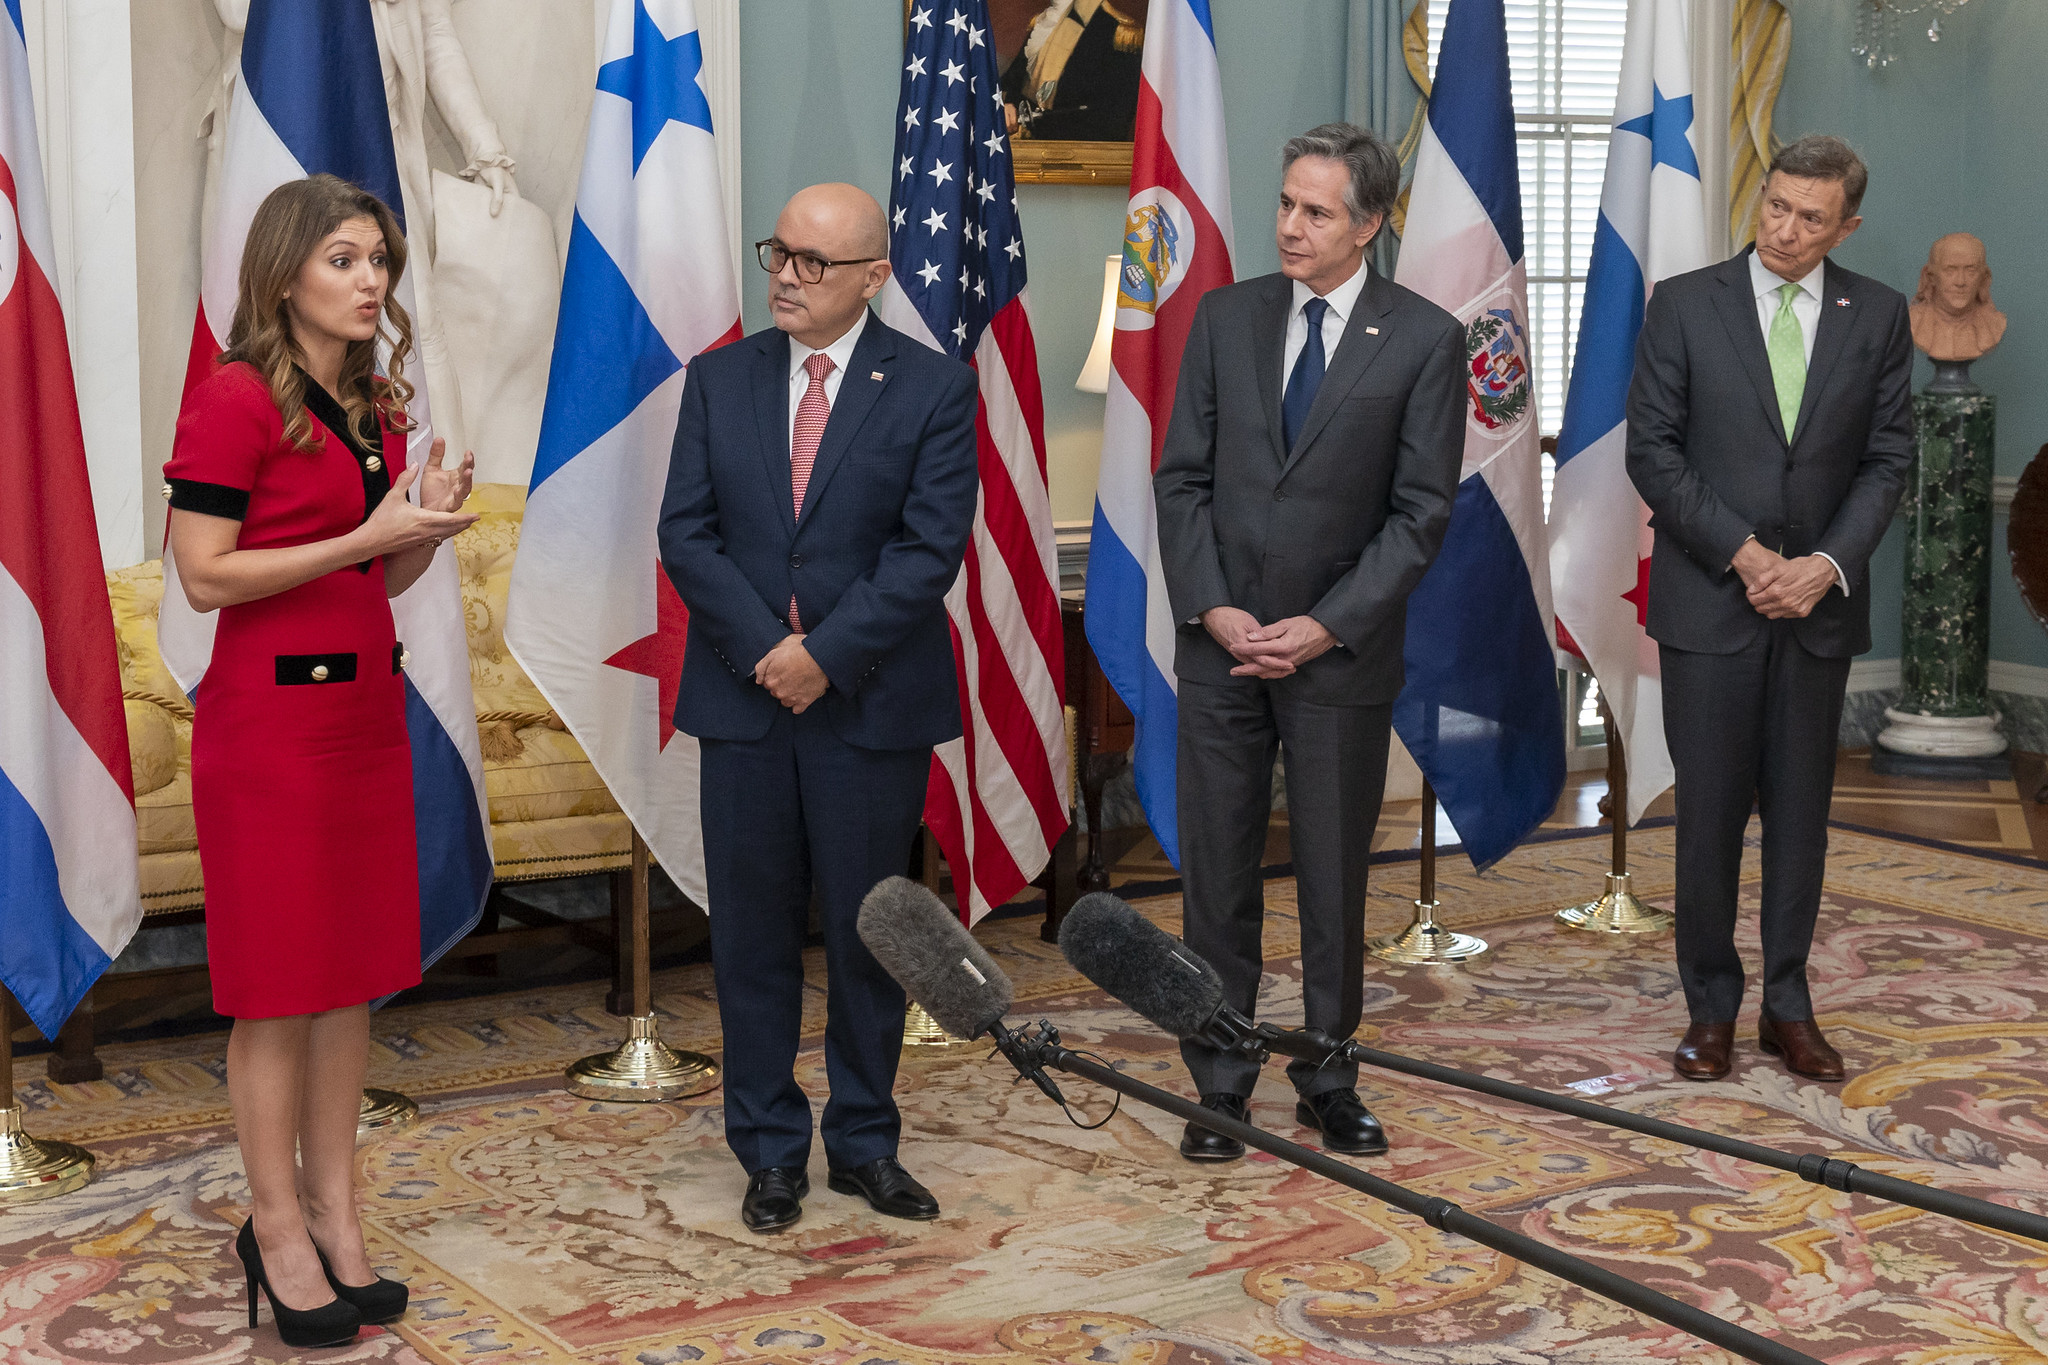 Ministers of Foreign Affairs of Panama, Costa Rica, Dominican Republic and U.S. Secretary Blinken.